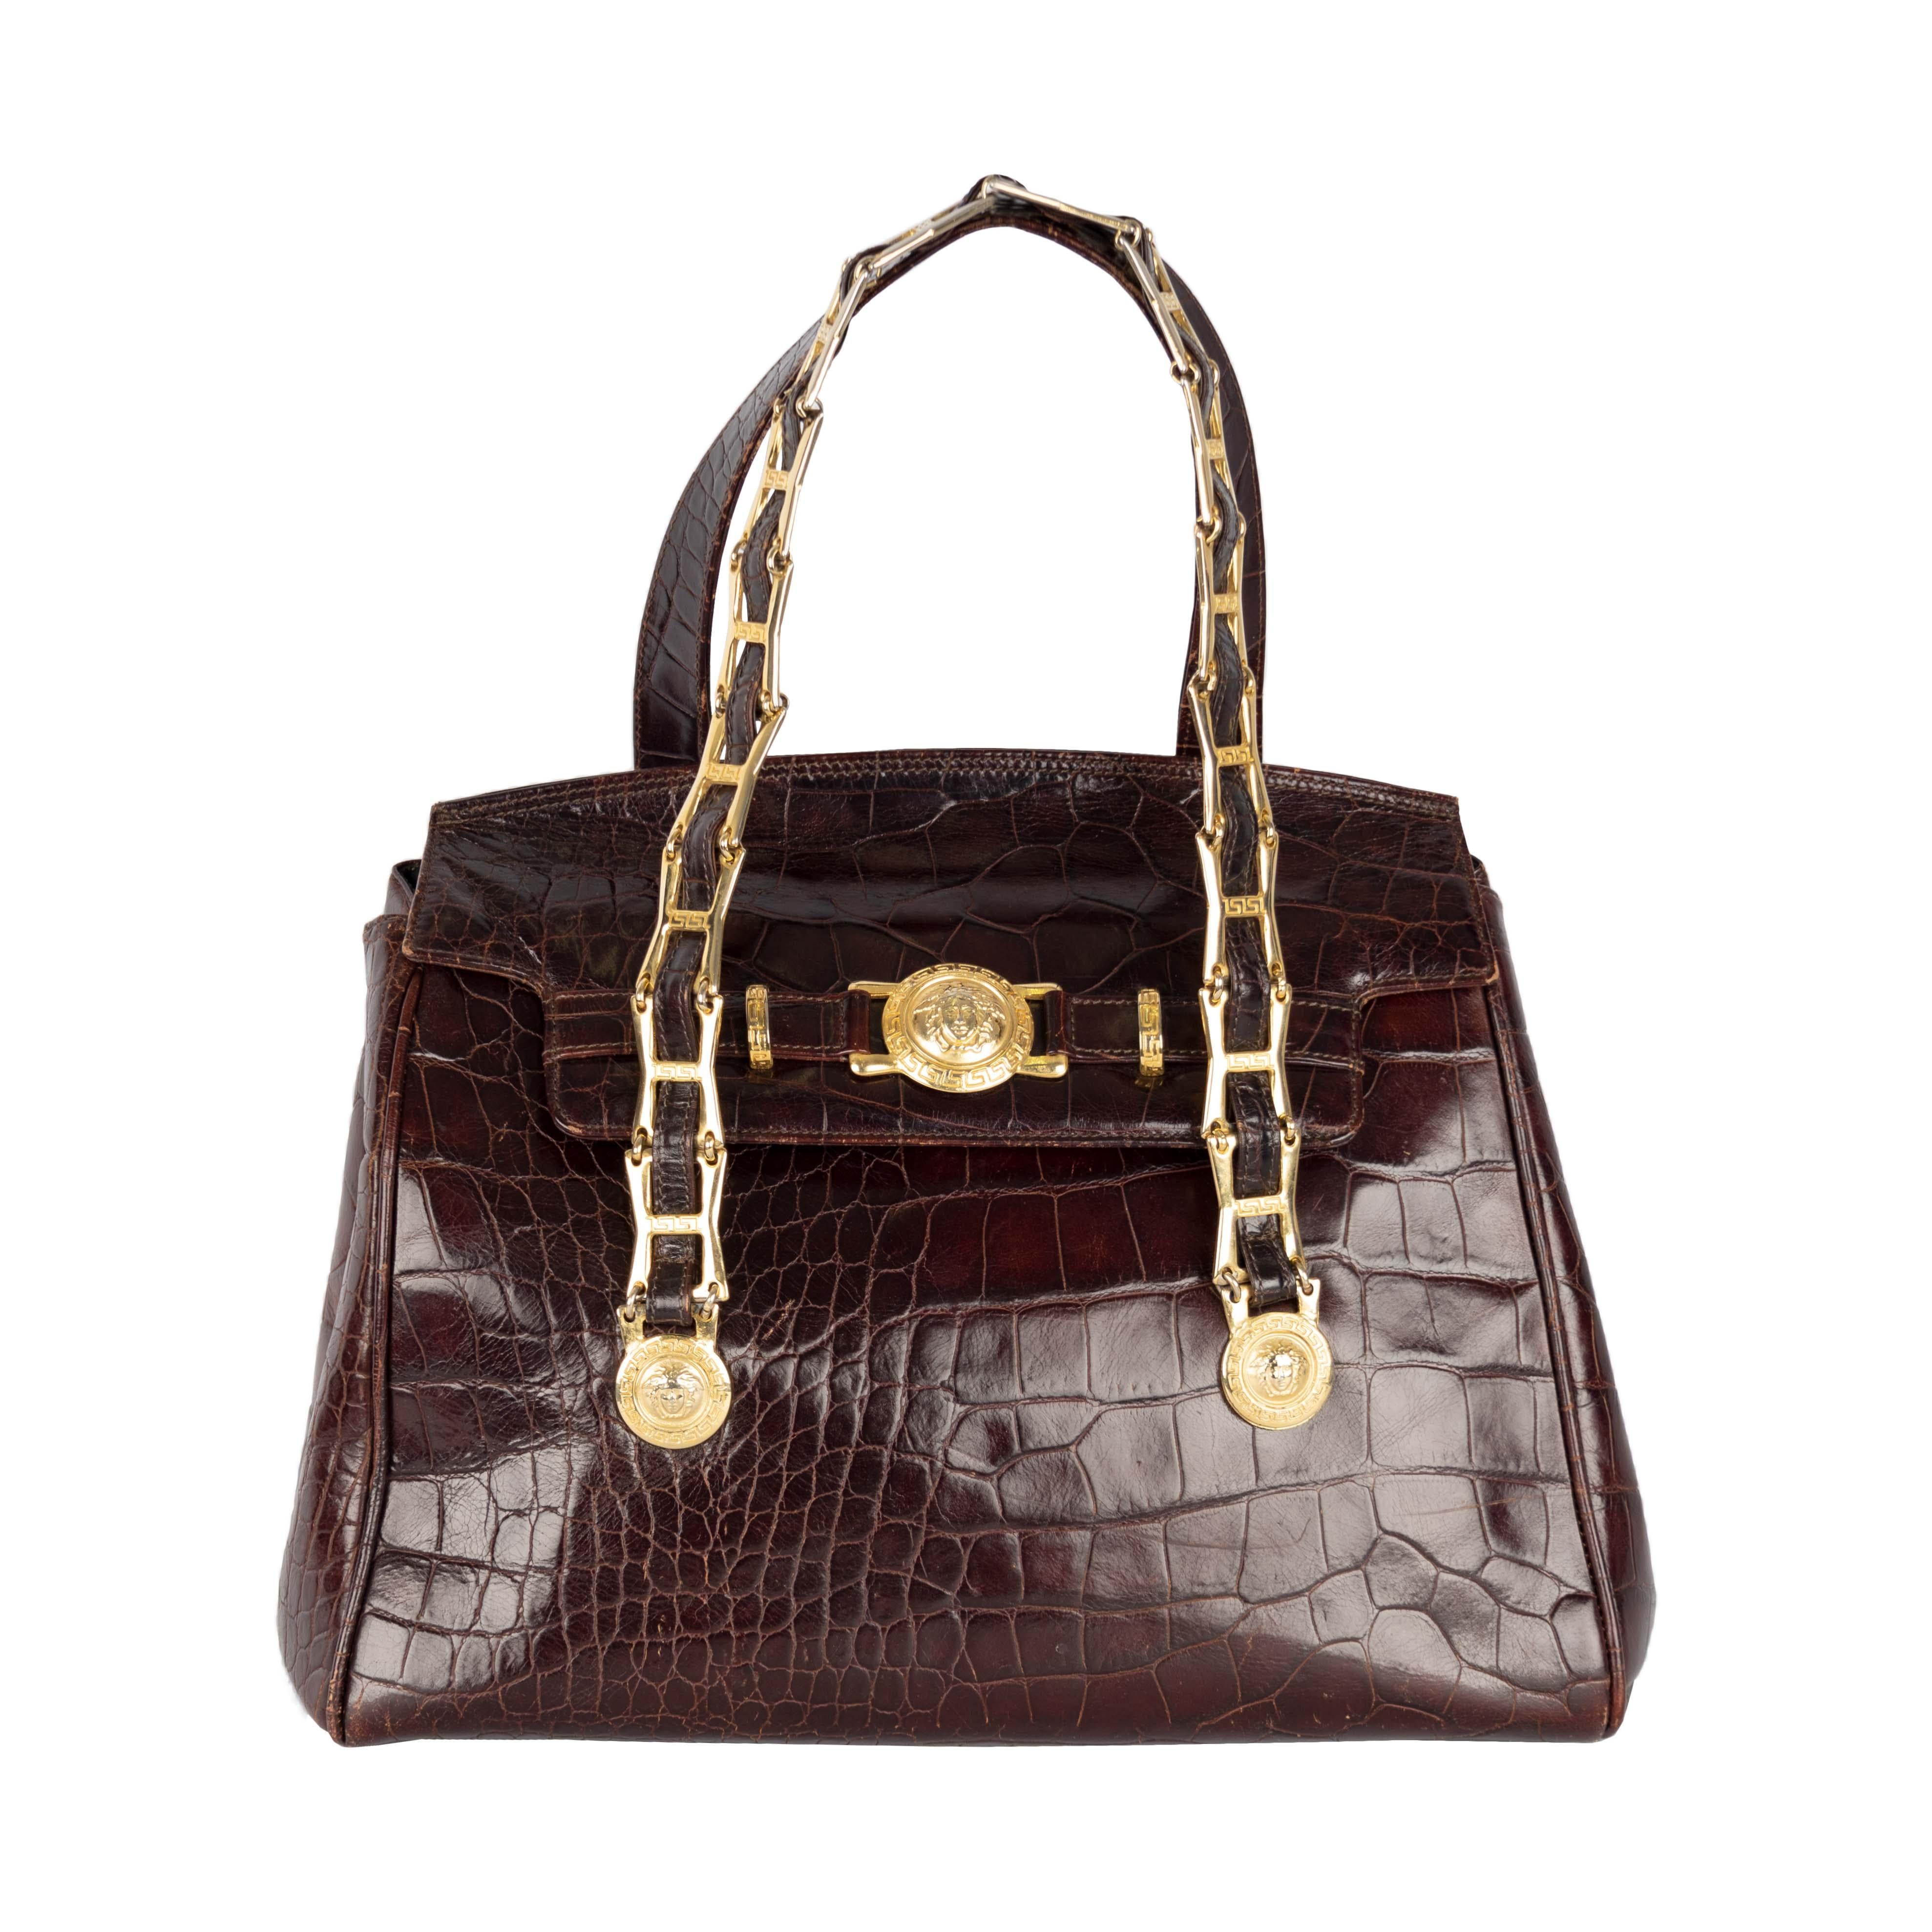 A rare vintage handbag by Gianni Versace in crocodile pattern embossed leather with a wallet and a passport/document holder. The bag features the brand's iconic golden medallion over the flap and at the end of the straps. The front handle strap is